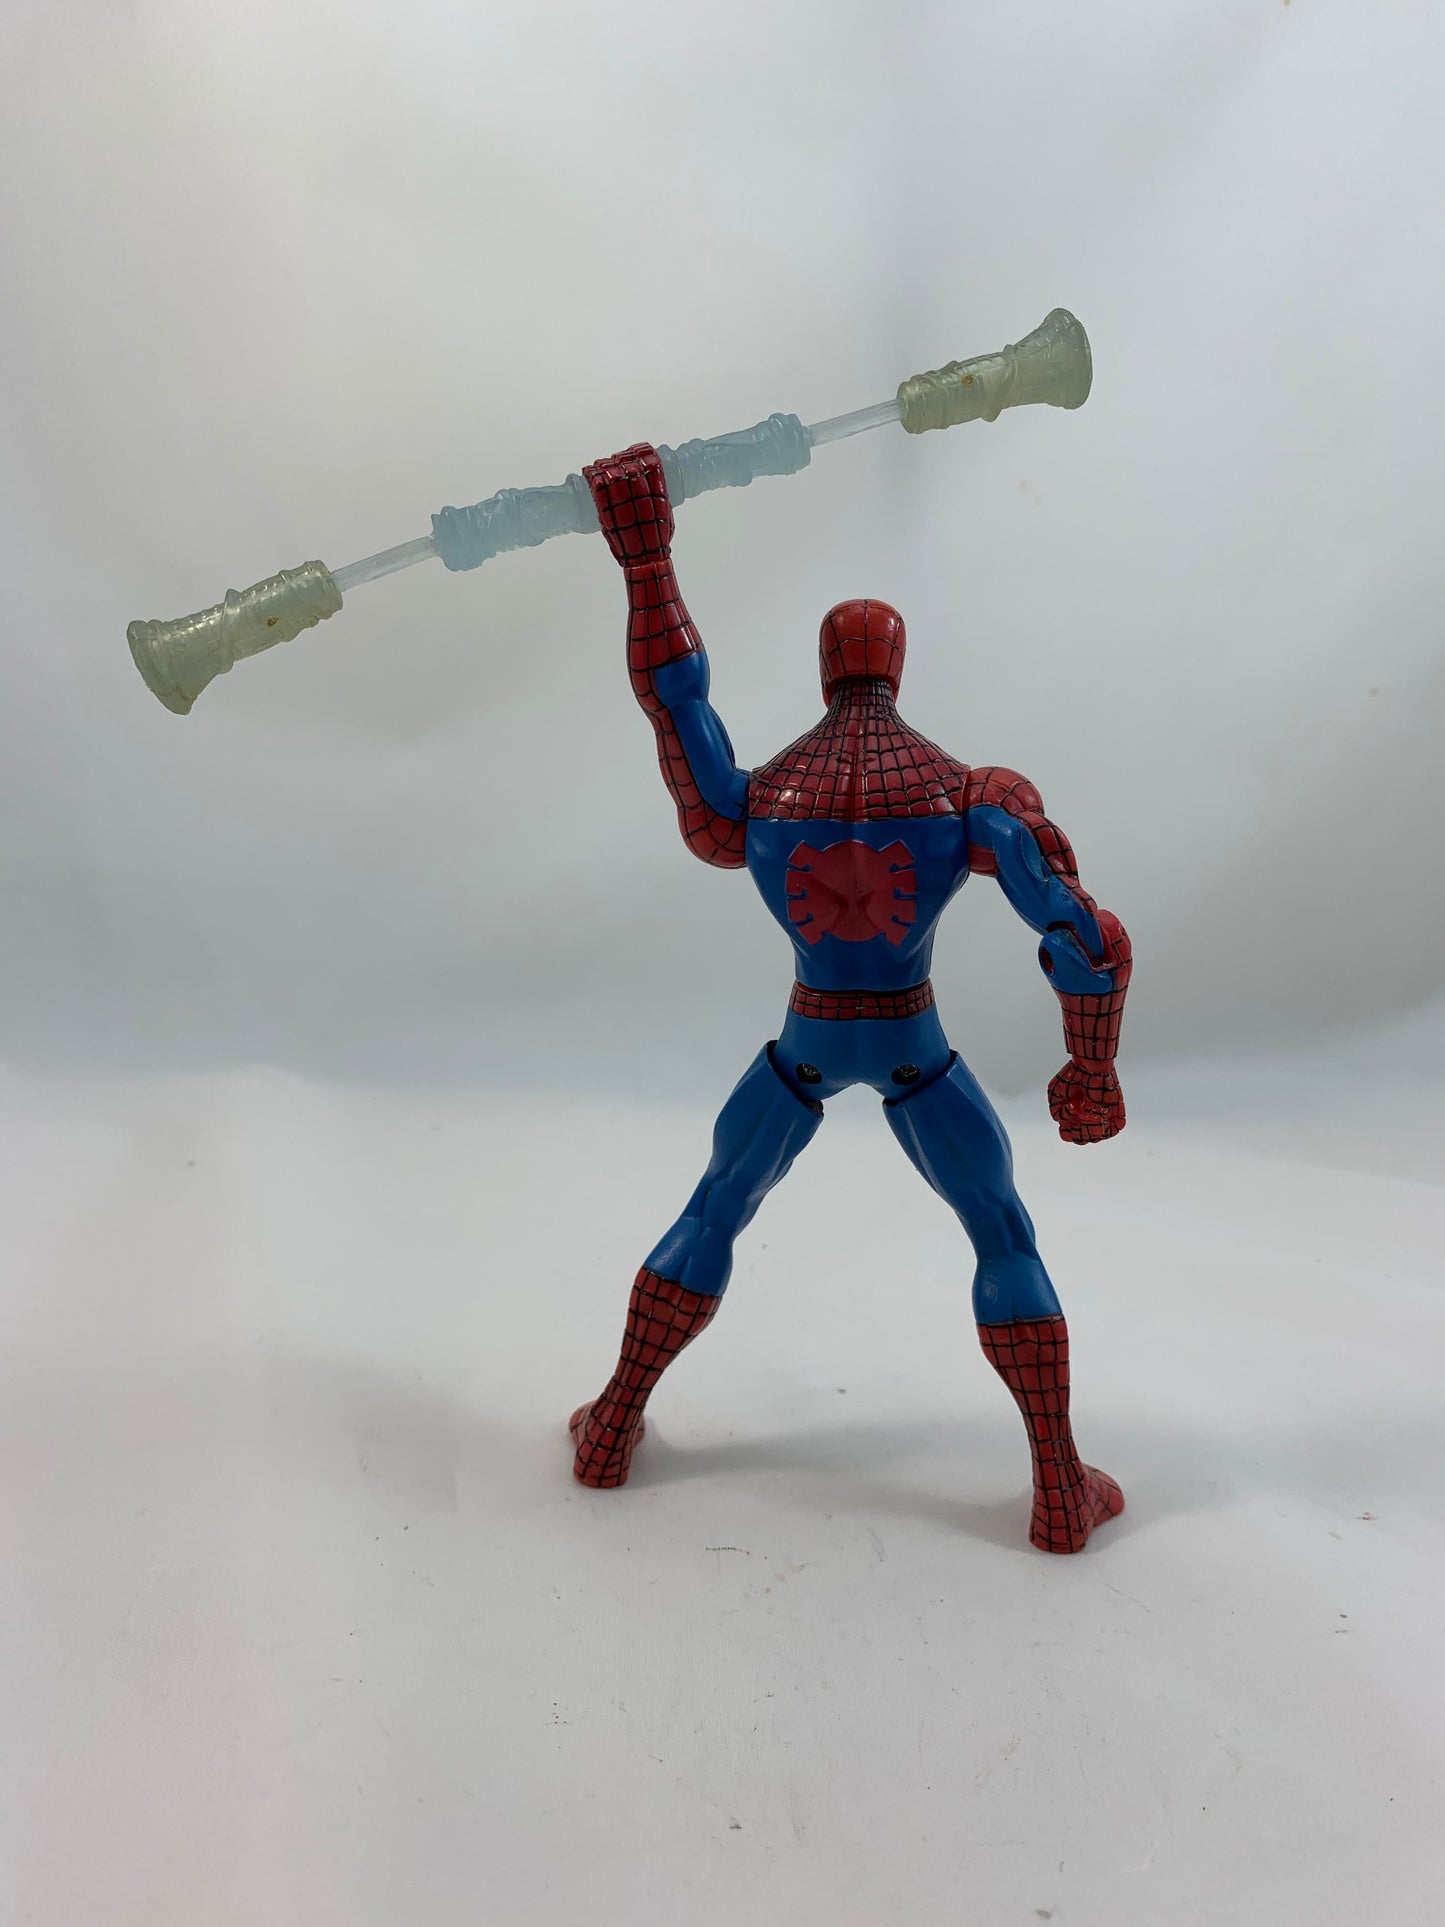 HASBRO MARVEL SPIDERMAN WEB BATTLERS 2010 with spinning weapon. - Loose